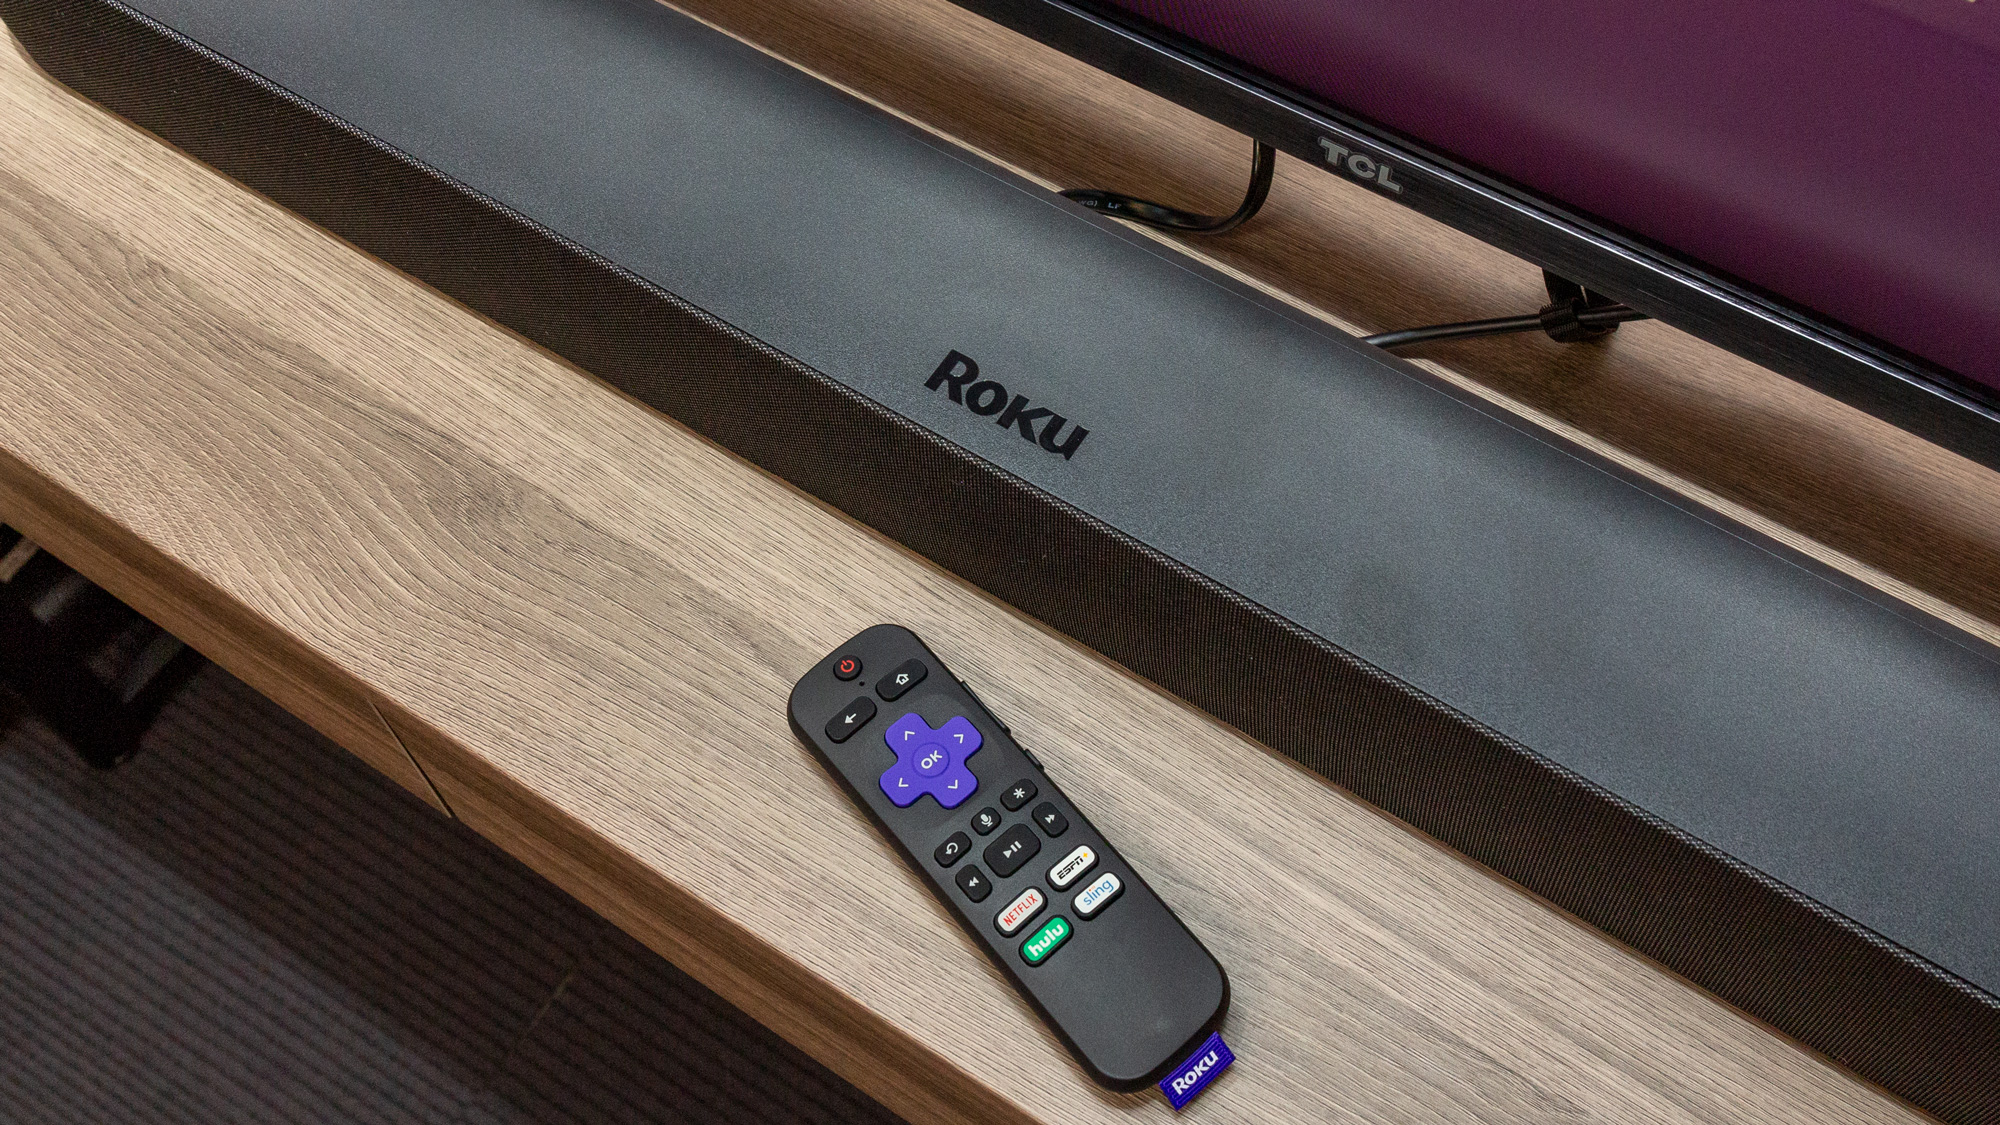 How to Pick the Best Roku Device (2023): A Guide to Each Model